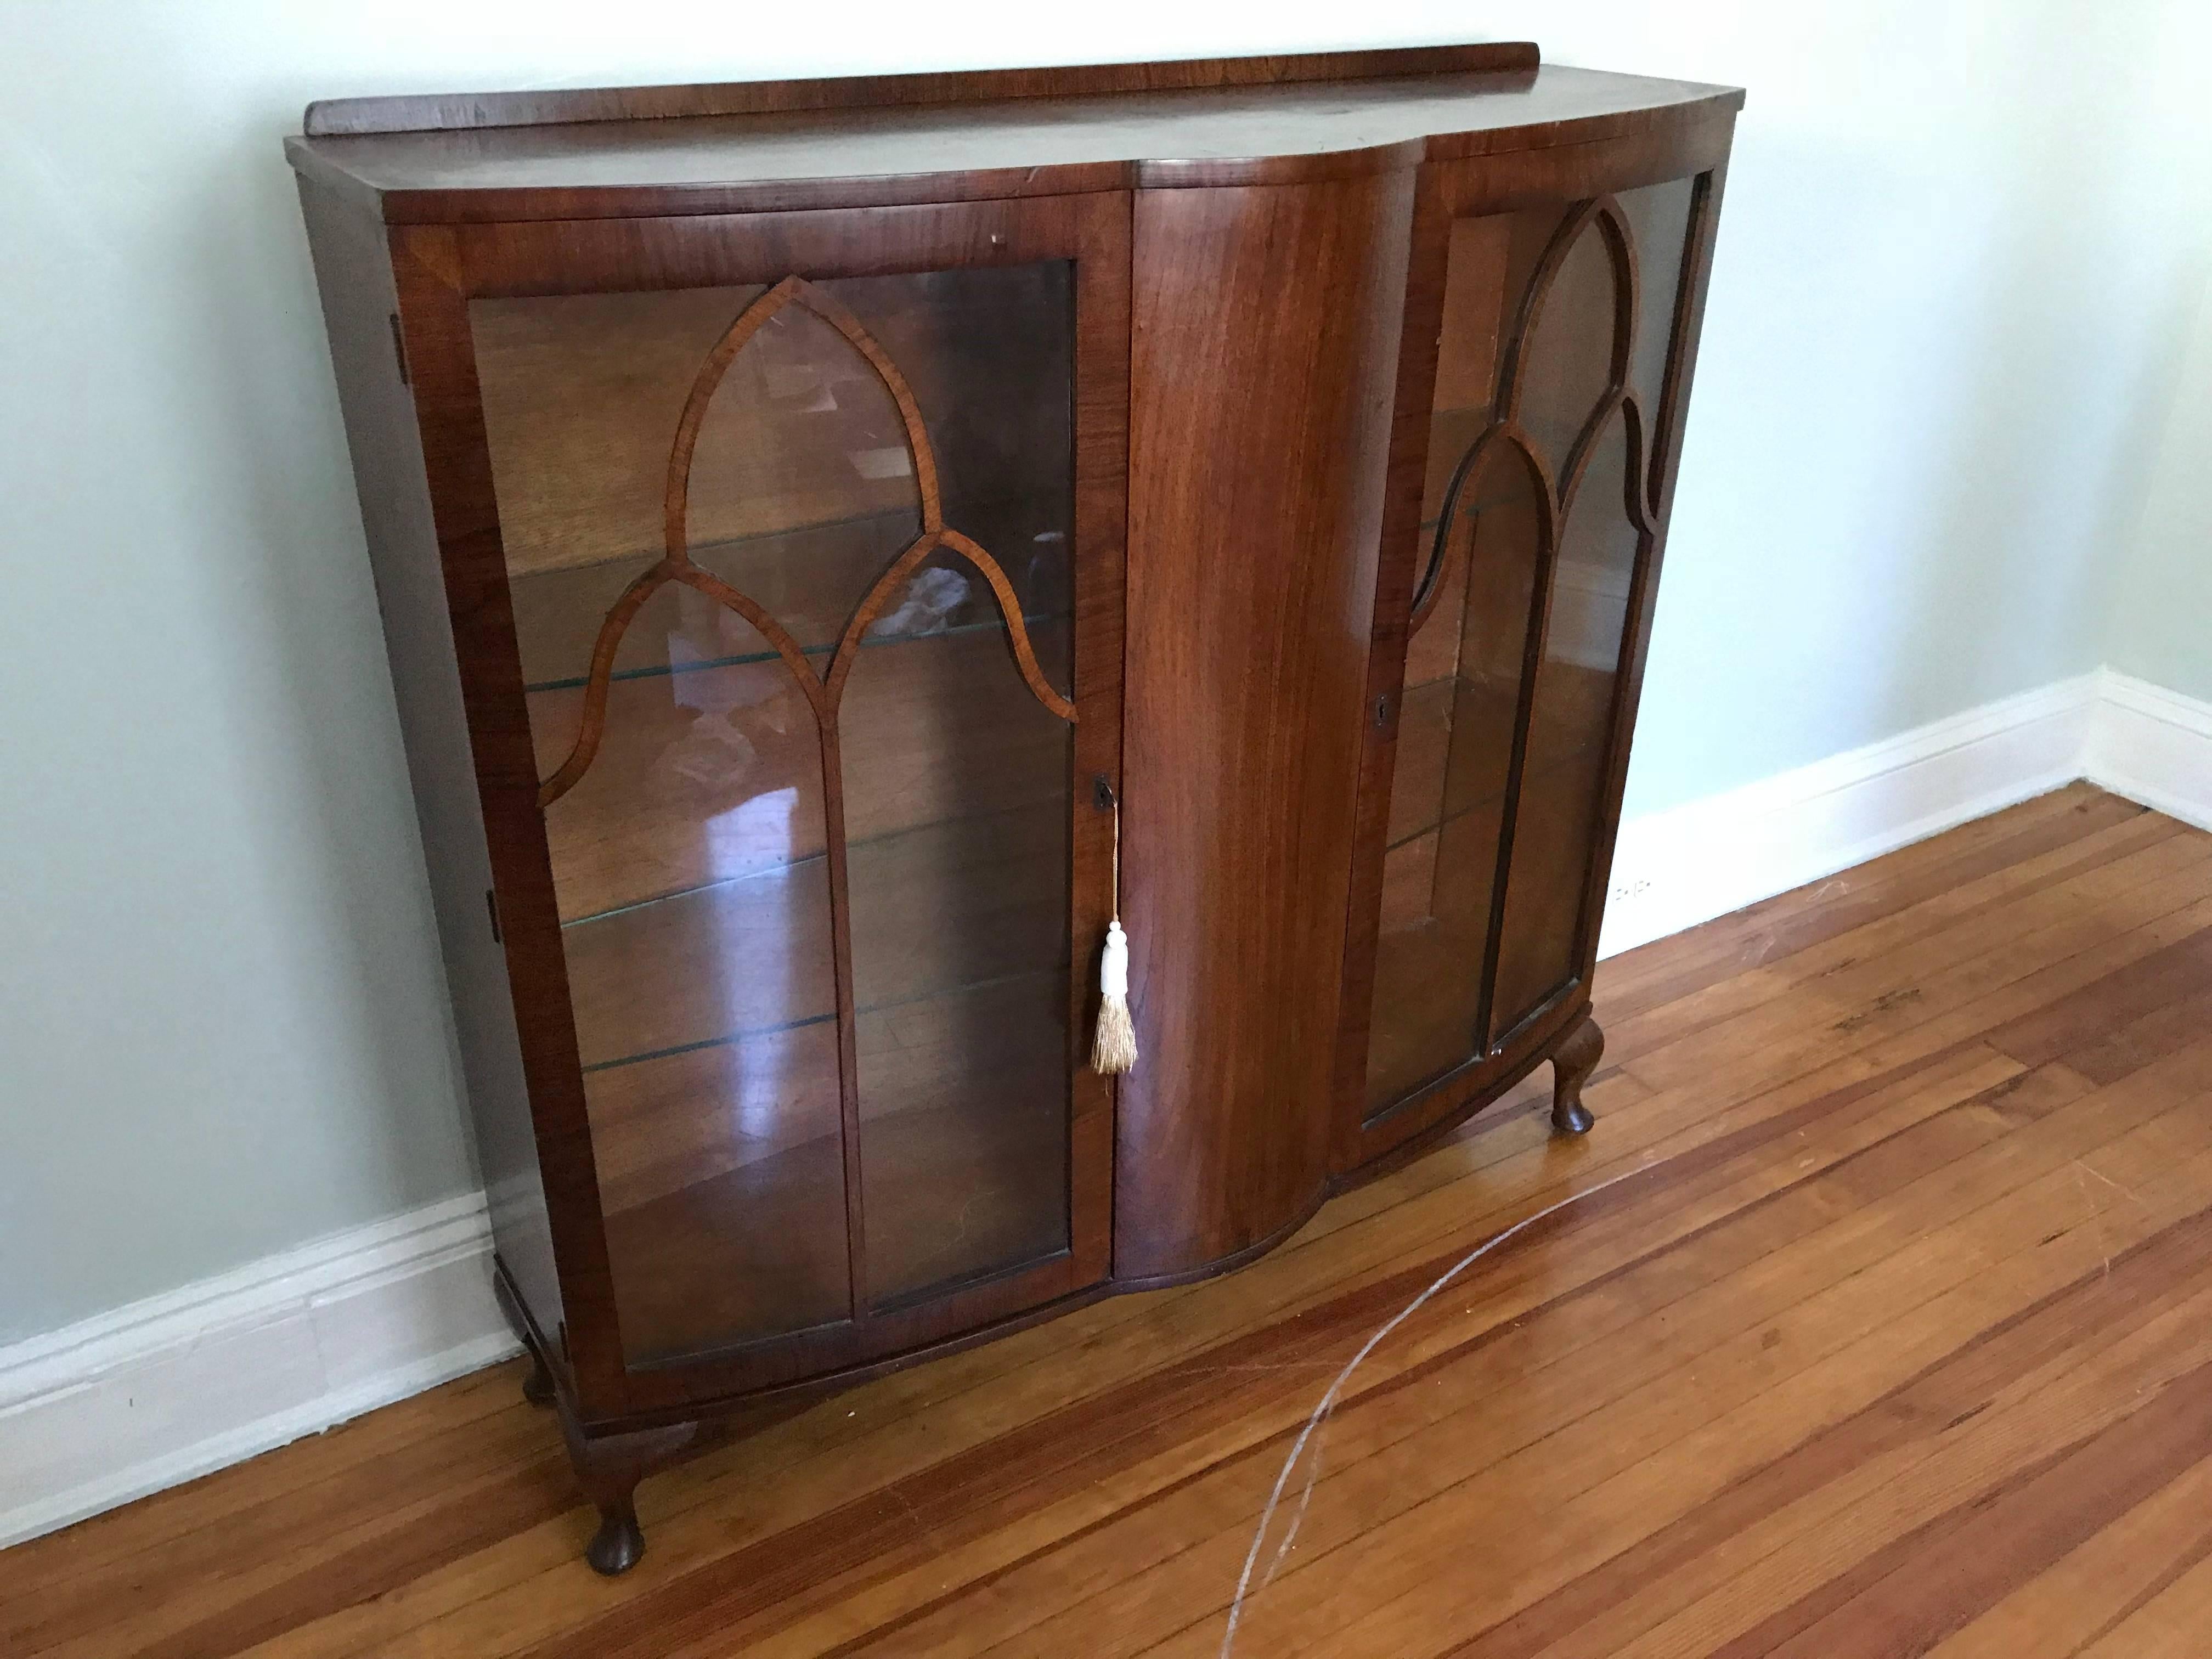 Offered is a beautiful, 1920s French Art Deco walnut and glass curio display cabinet. The piece has two doors, three shelves, and includes the original key.